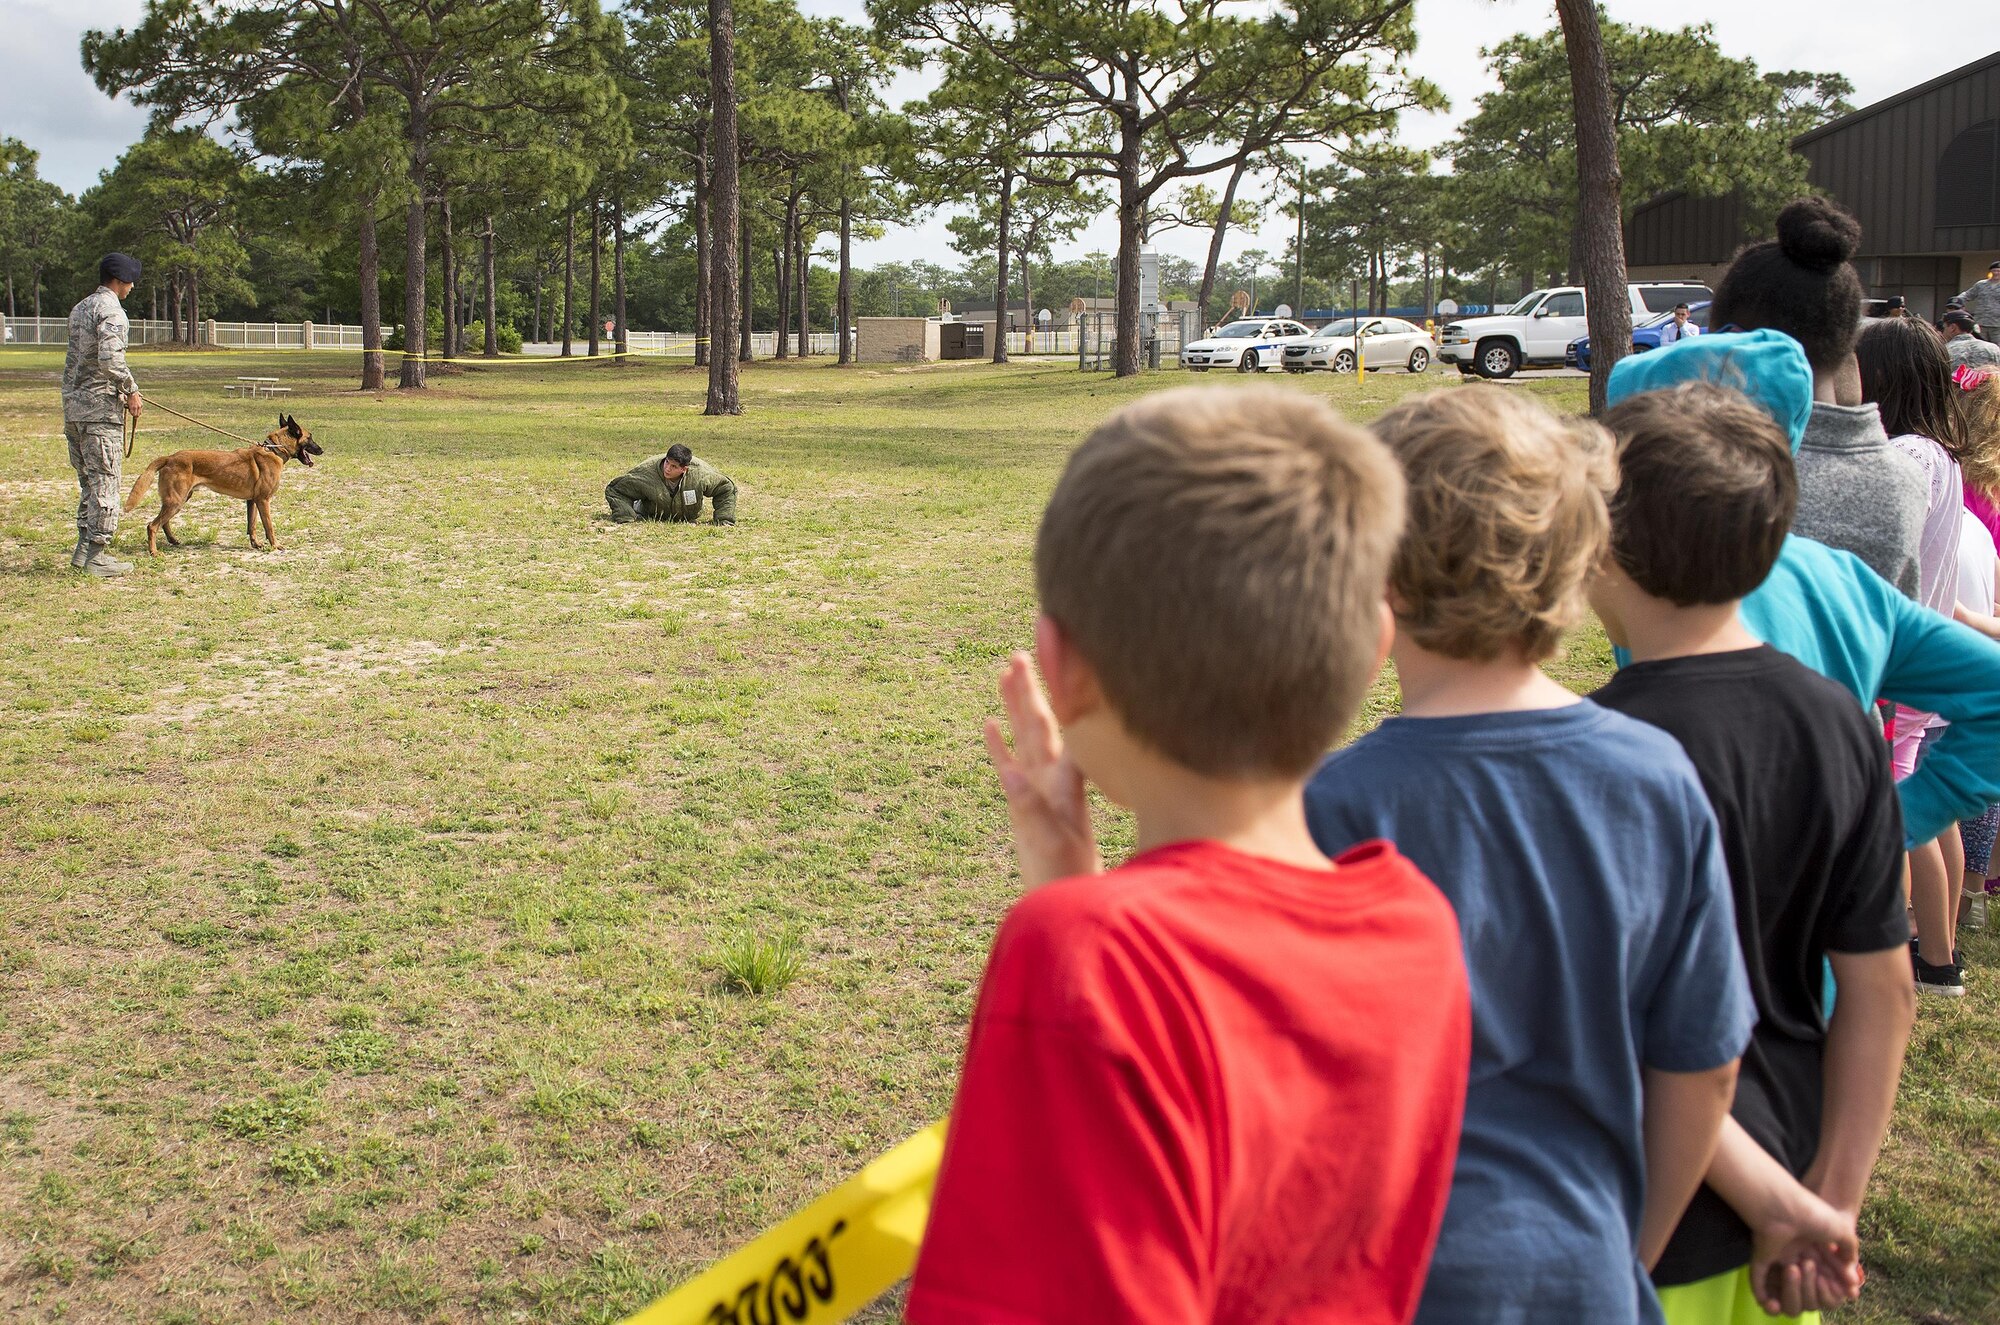 Eglin Elementary School students watch a 96th Security Forces Squadron Military Working Dog demonstration May 18 at Eglin Air Force Base, Fla. The event was in celebration of National Police Week. More than 100 children watched the demonstration. (U.S. Air Force photo/Samuel King Jr.)